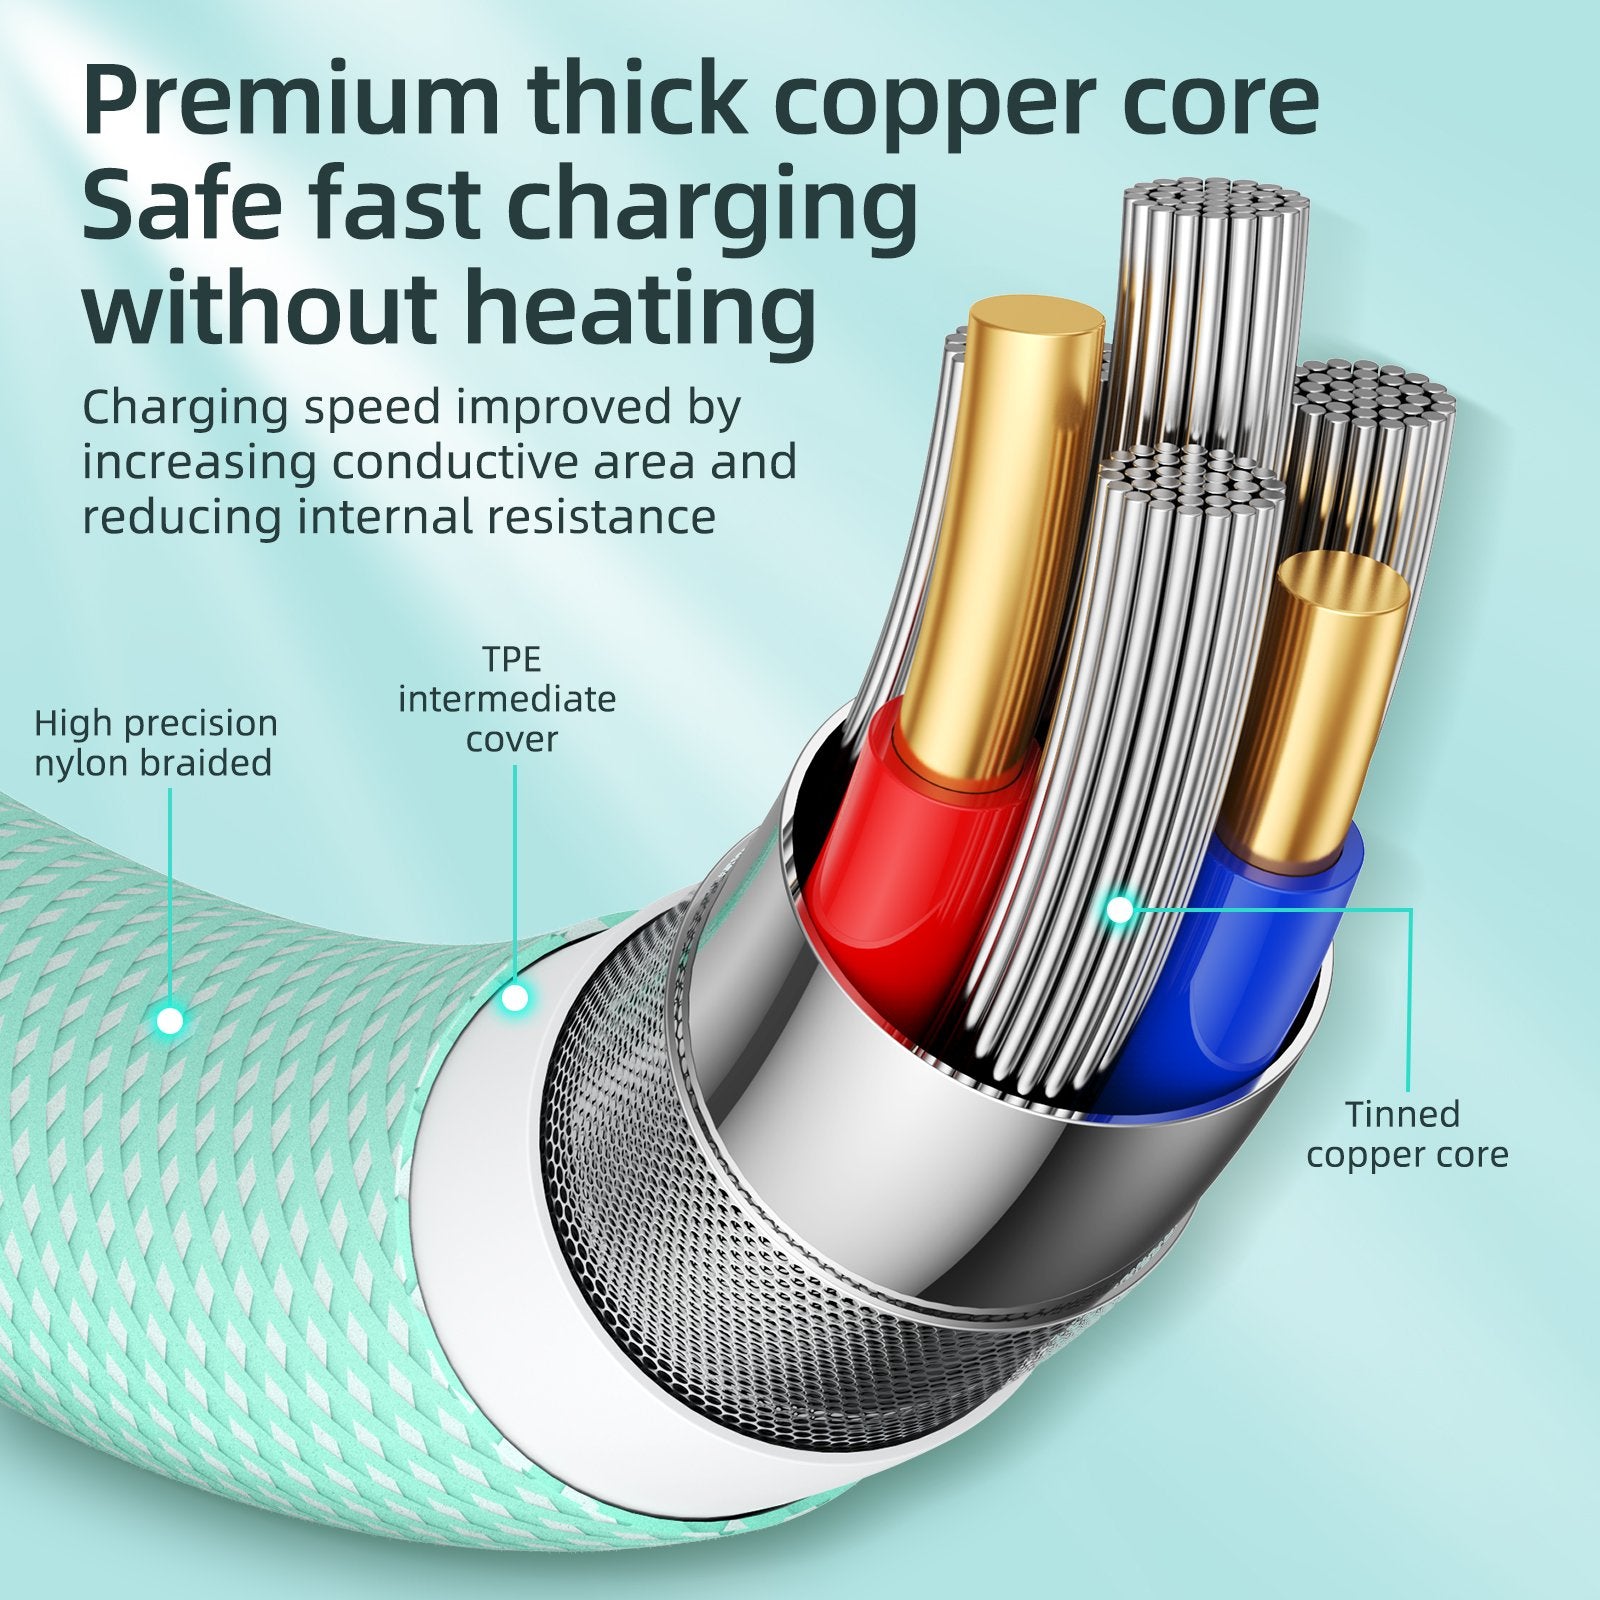 Premium thick copper core safe fast charging without heating